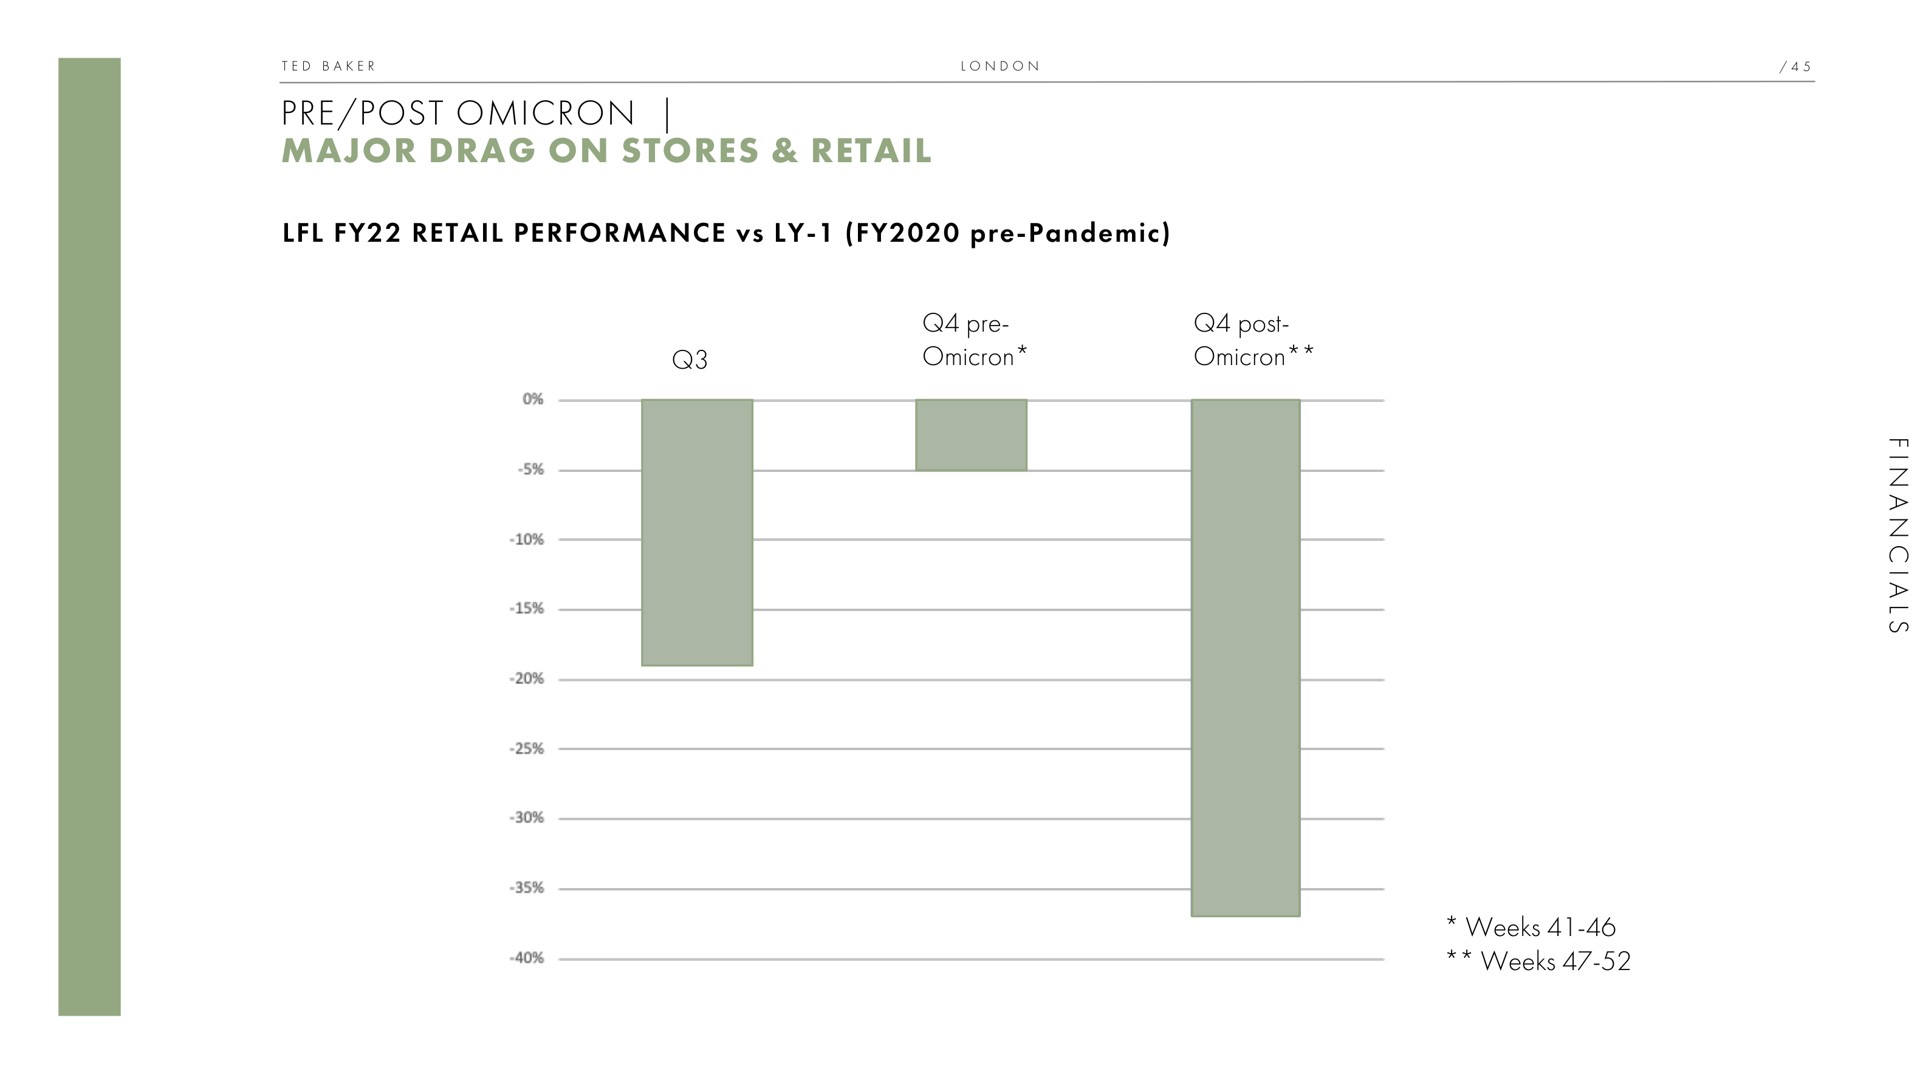 post omicron major drag on stores retail retail performance pandemic omicron post omicron weeks weeks | Ted Baker